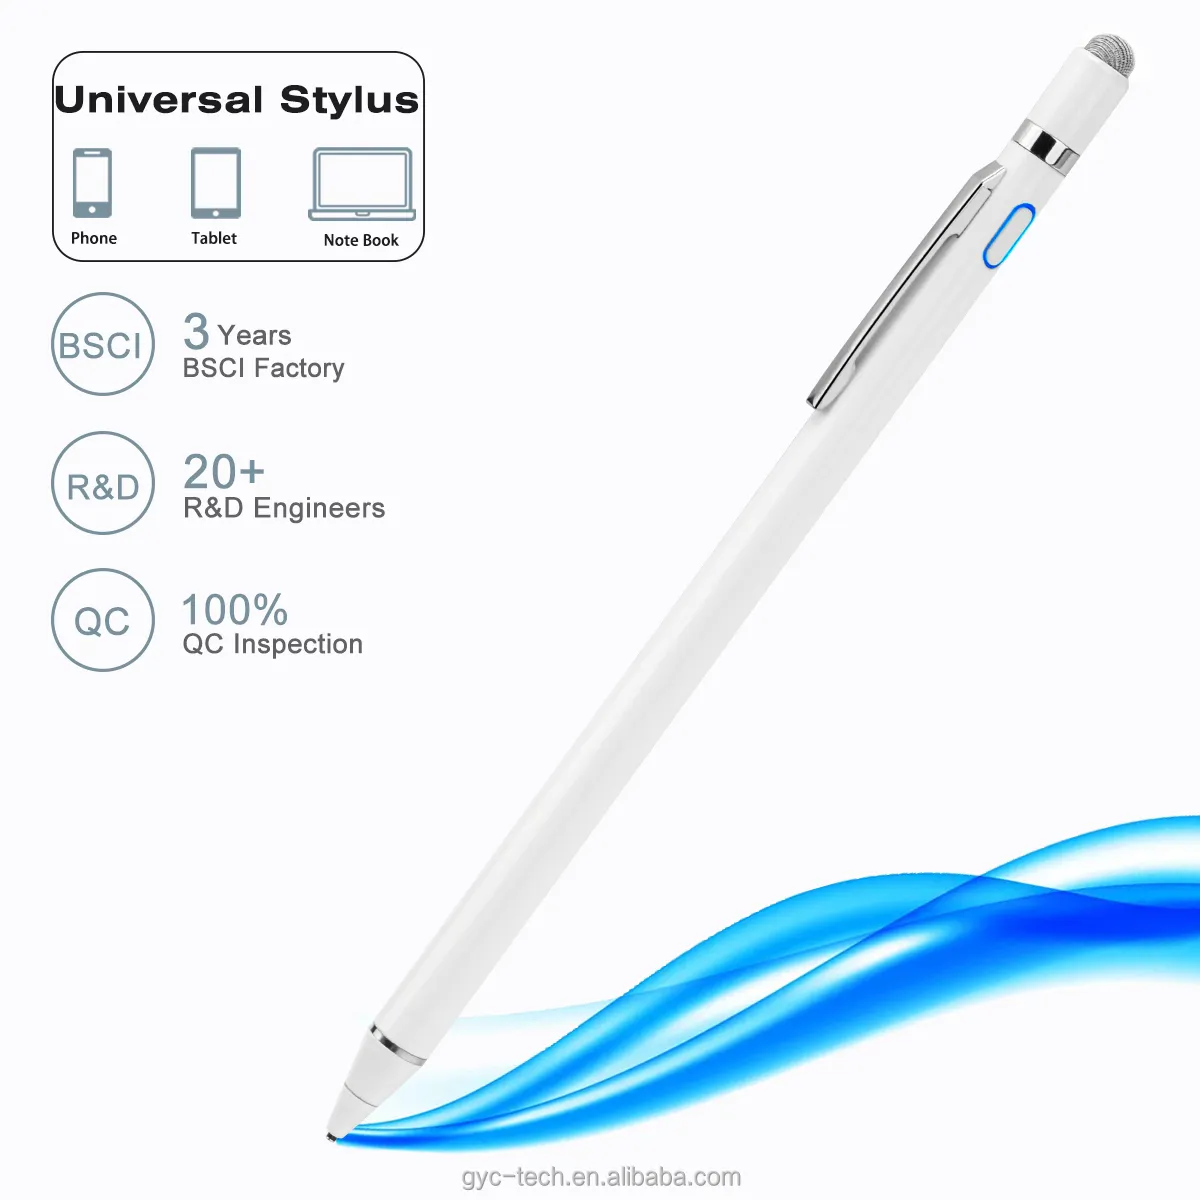 Universal 1.5mm Super Fine Point Tip Stylus Pen For Mobile Phone Dell Laptop Pen Compatible With Android Ios For Touch Pencil